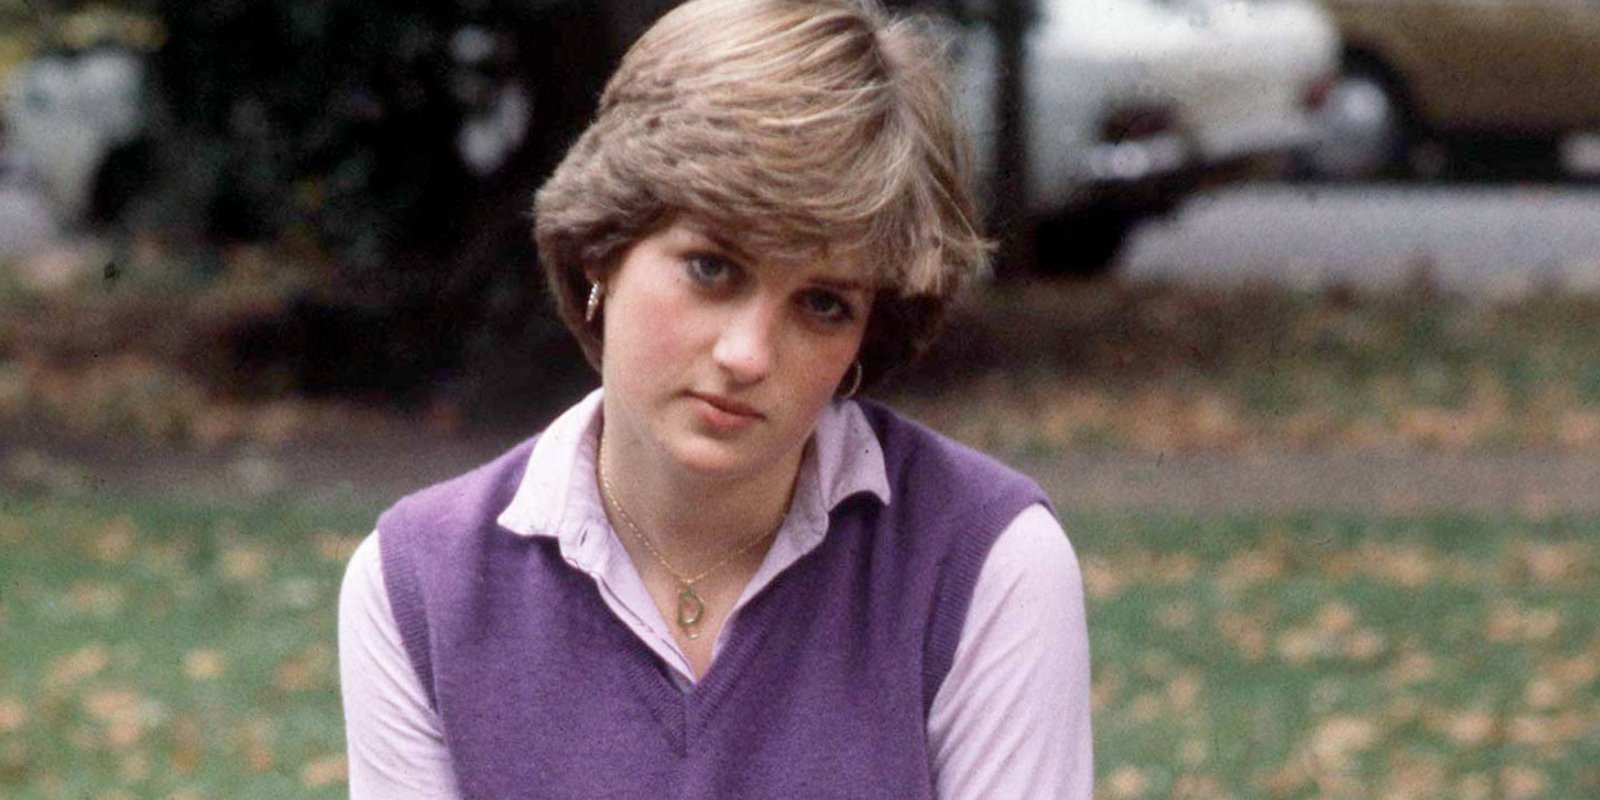 Princess Diana was called 'shy Di' by the press, but that nickname was inaccurate claims a royal press secretary.